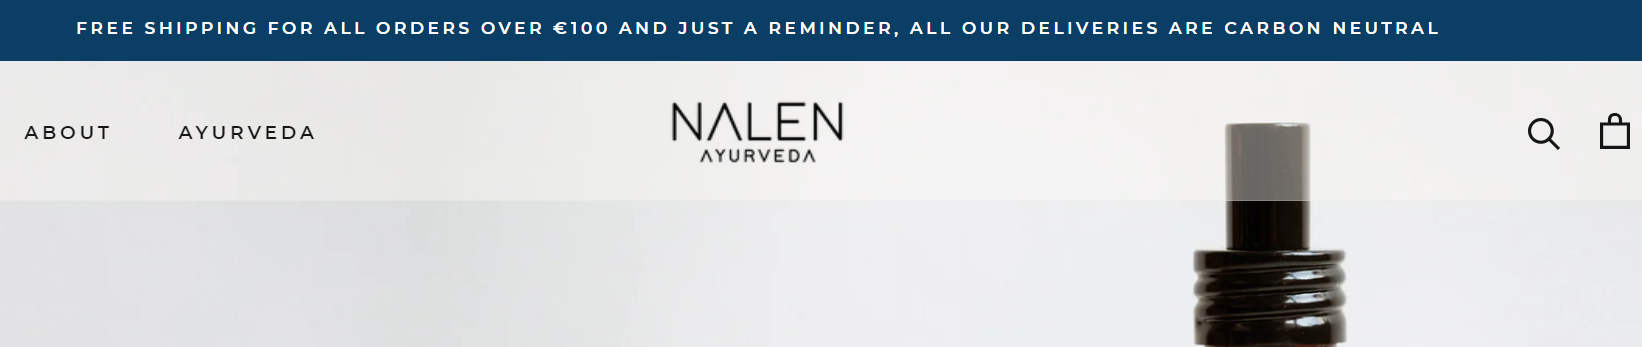 Nalen Ayurveda Free Shipping Carbon Neutral Best Ecommerce Websites